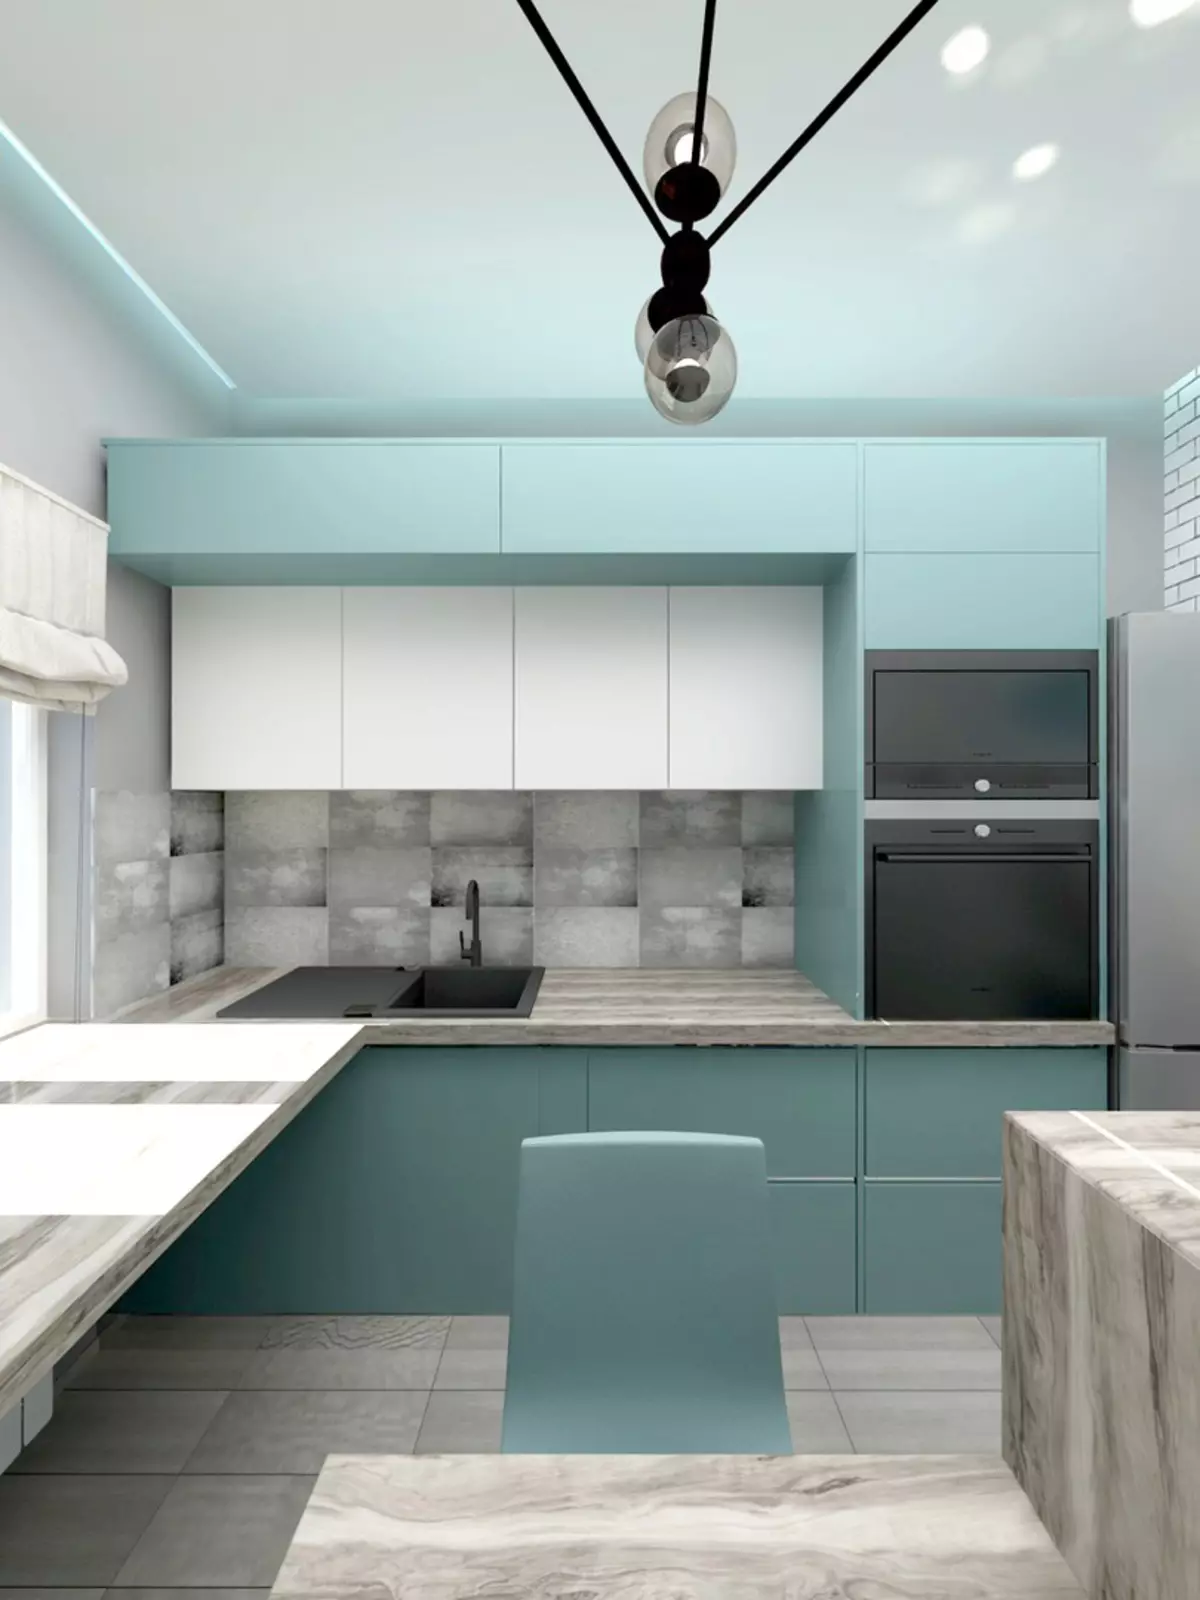 Turquoise kitchen (80 photos): selection of kitchen headset of turquoise-white and gray-turquoise color in the interior, combination of turquoise with beige and Tiffany's color 21083_54